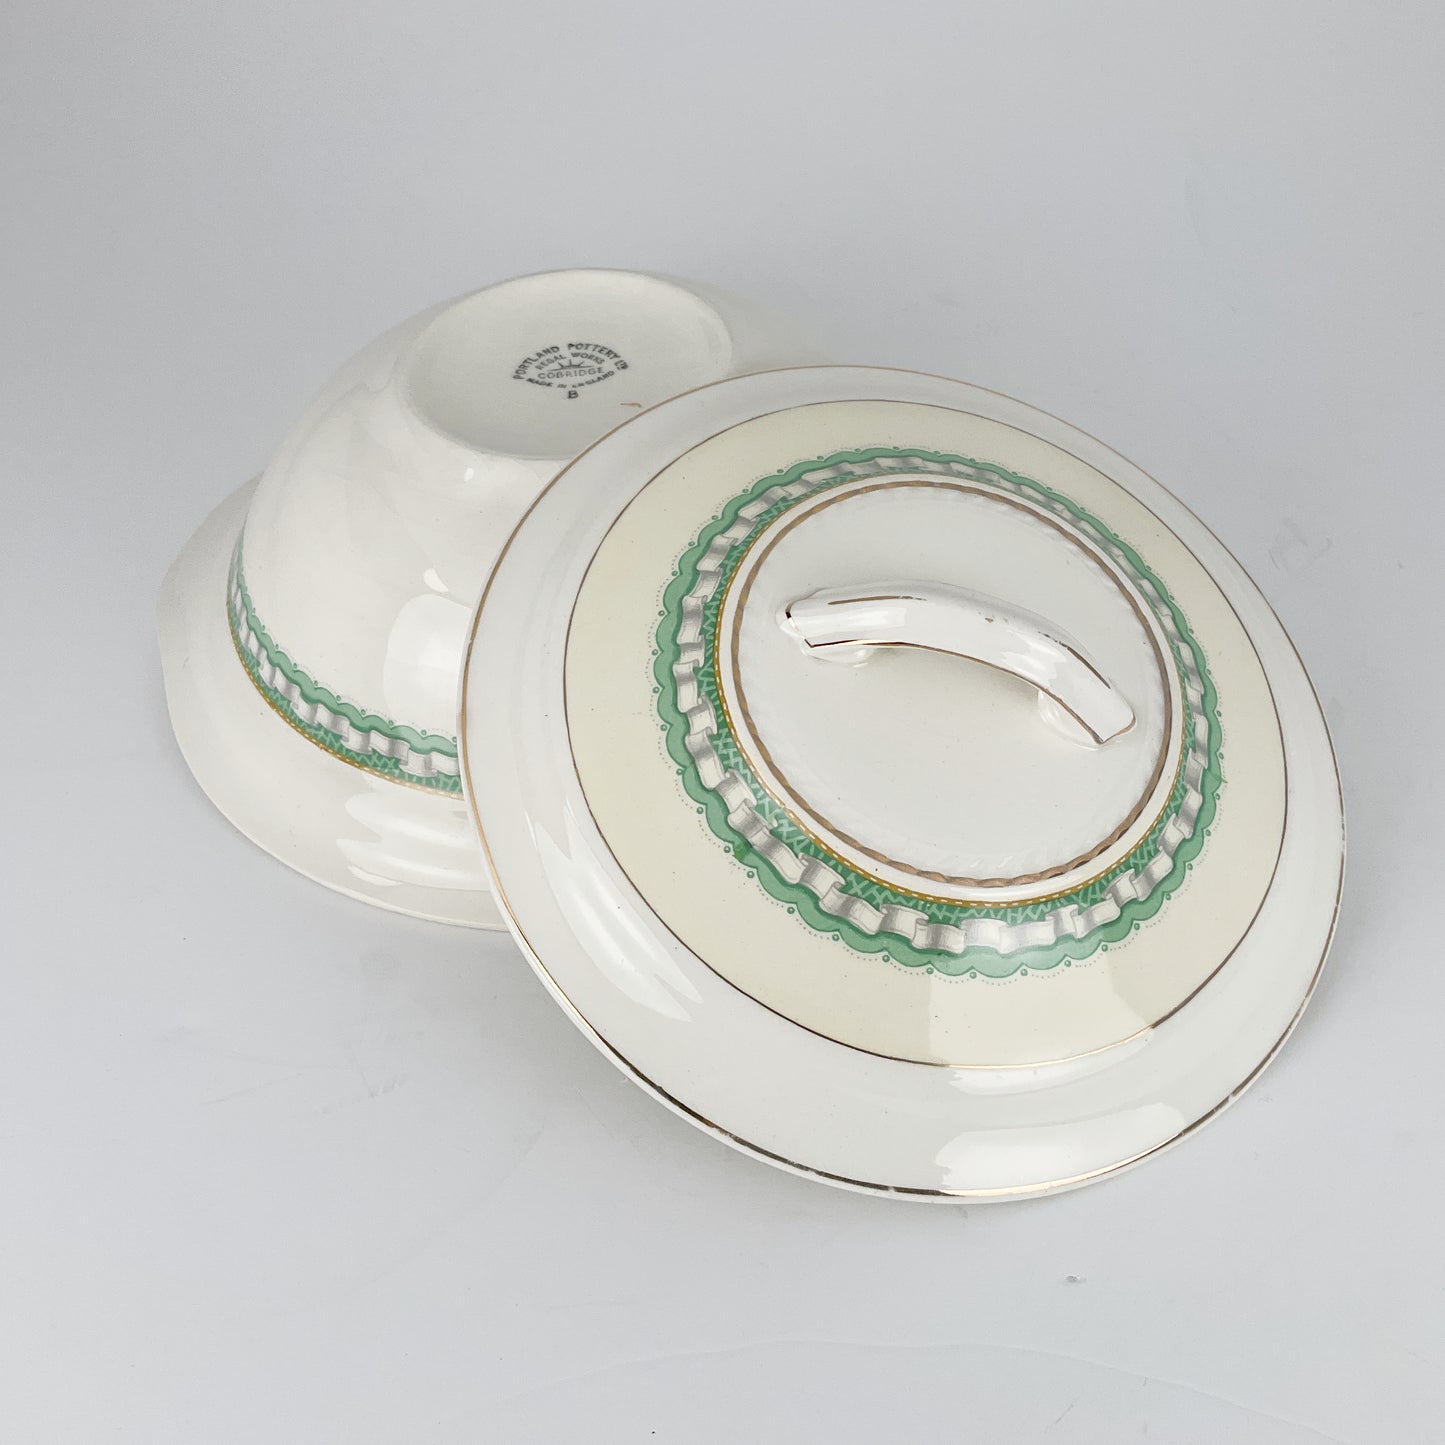 Portland Pottery - Serving Bowl with Lid